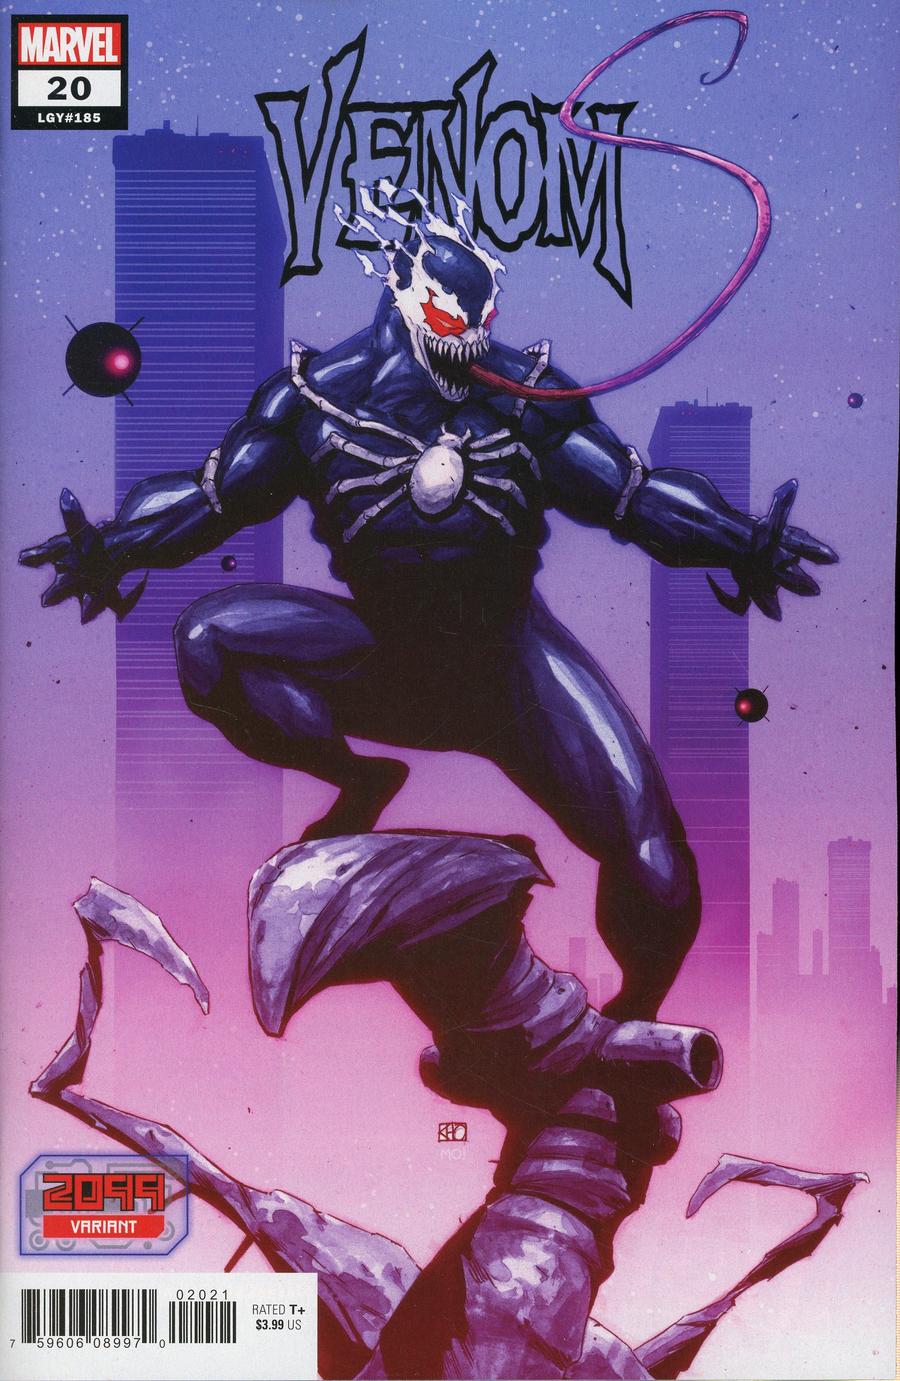 Venom Vol 4 #20 Cover B Variant Khoi Pham 2099 Cover (Absolute Carnage Tie-In)